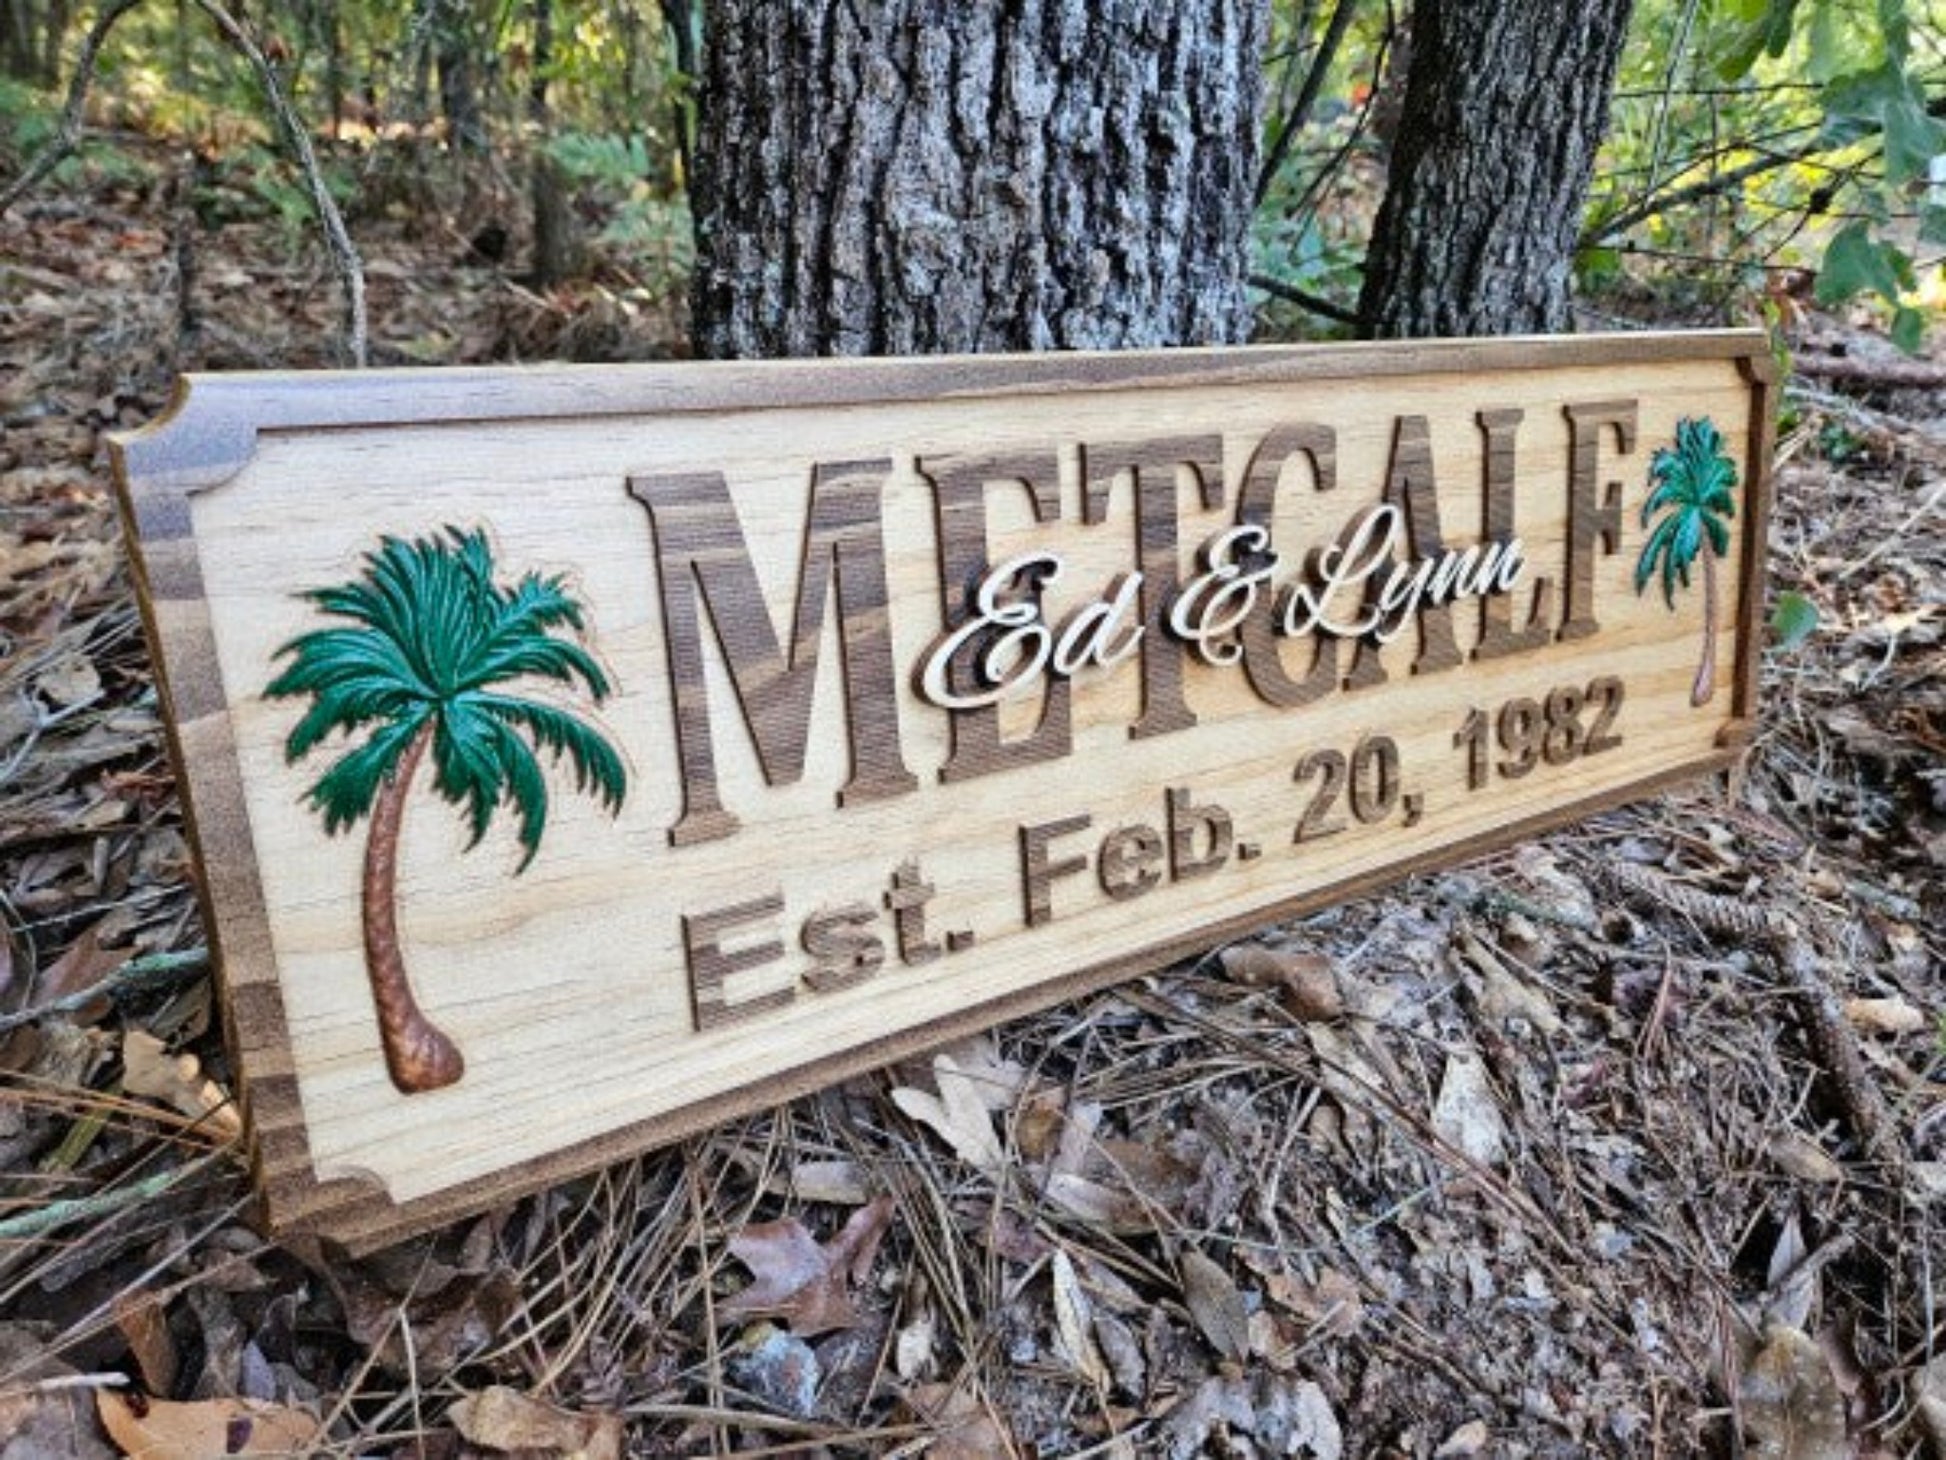 personalized family established date name sign, wedding gift, anniversary gift with wood carved palm trees hand painted